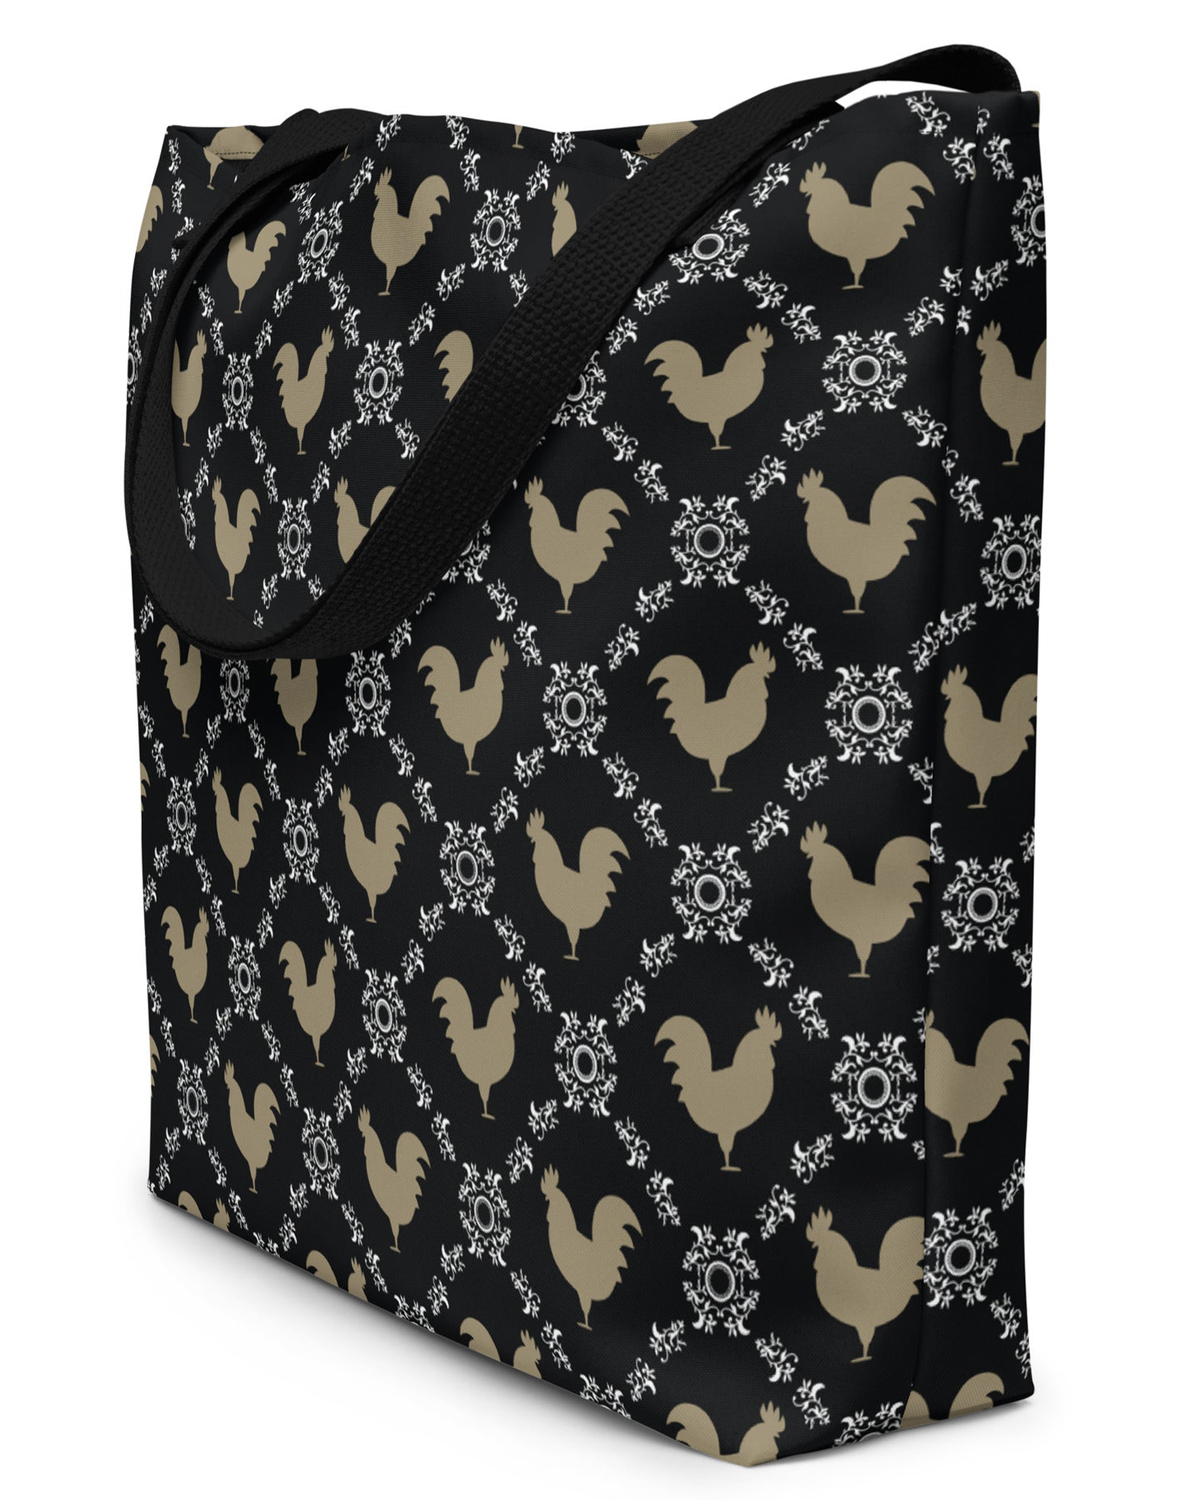 Farmhouse Rooster Open Tote Bag